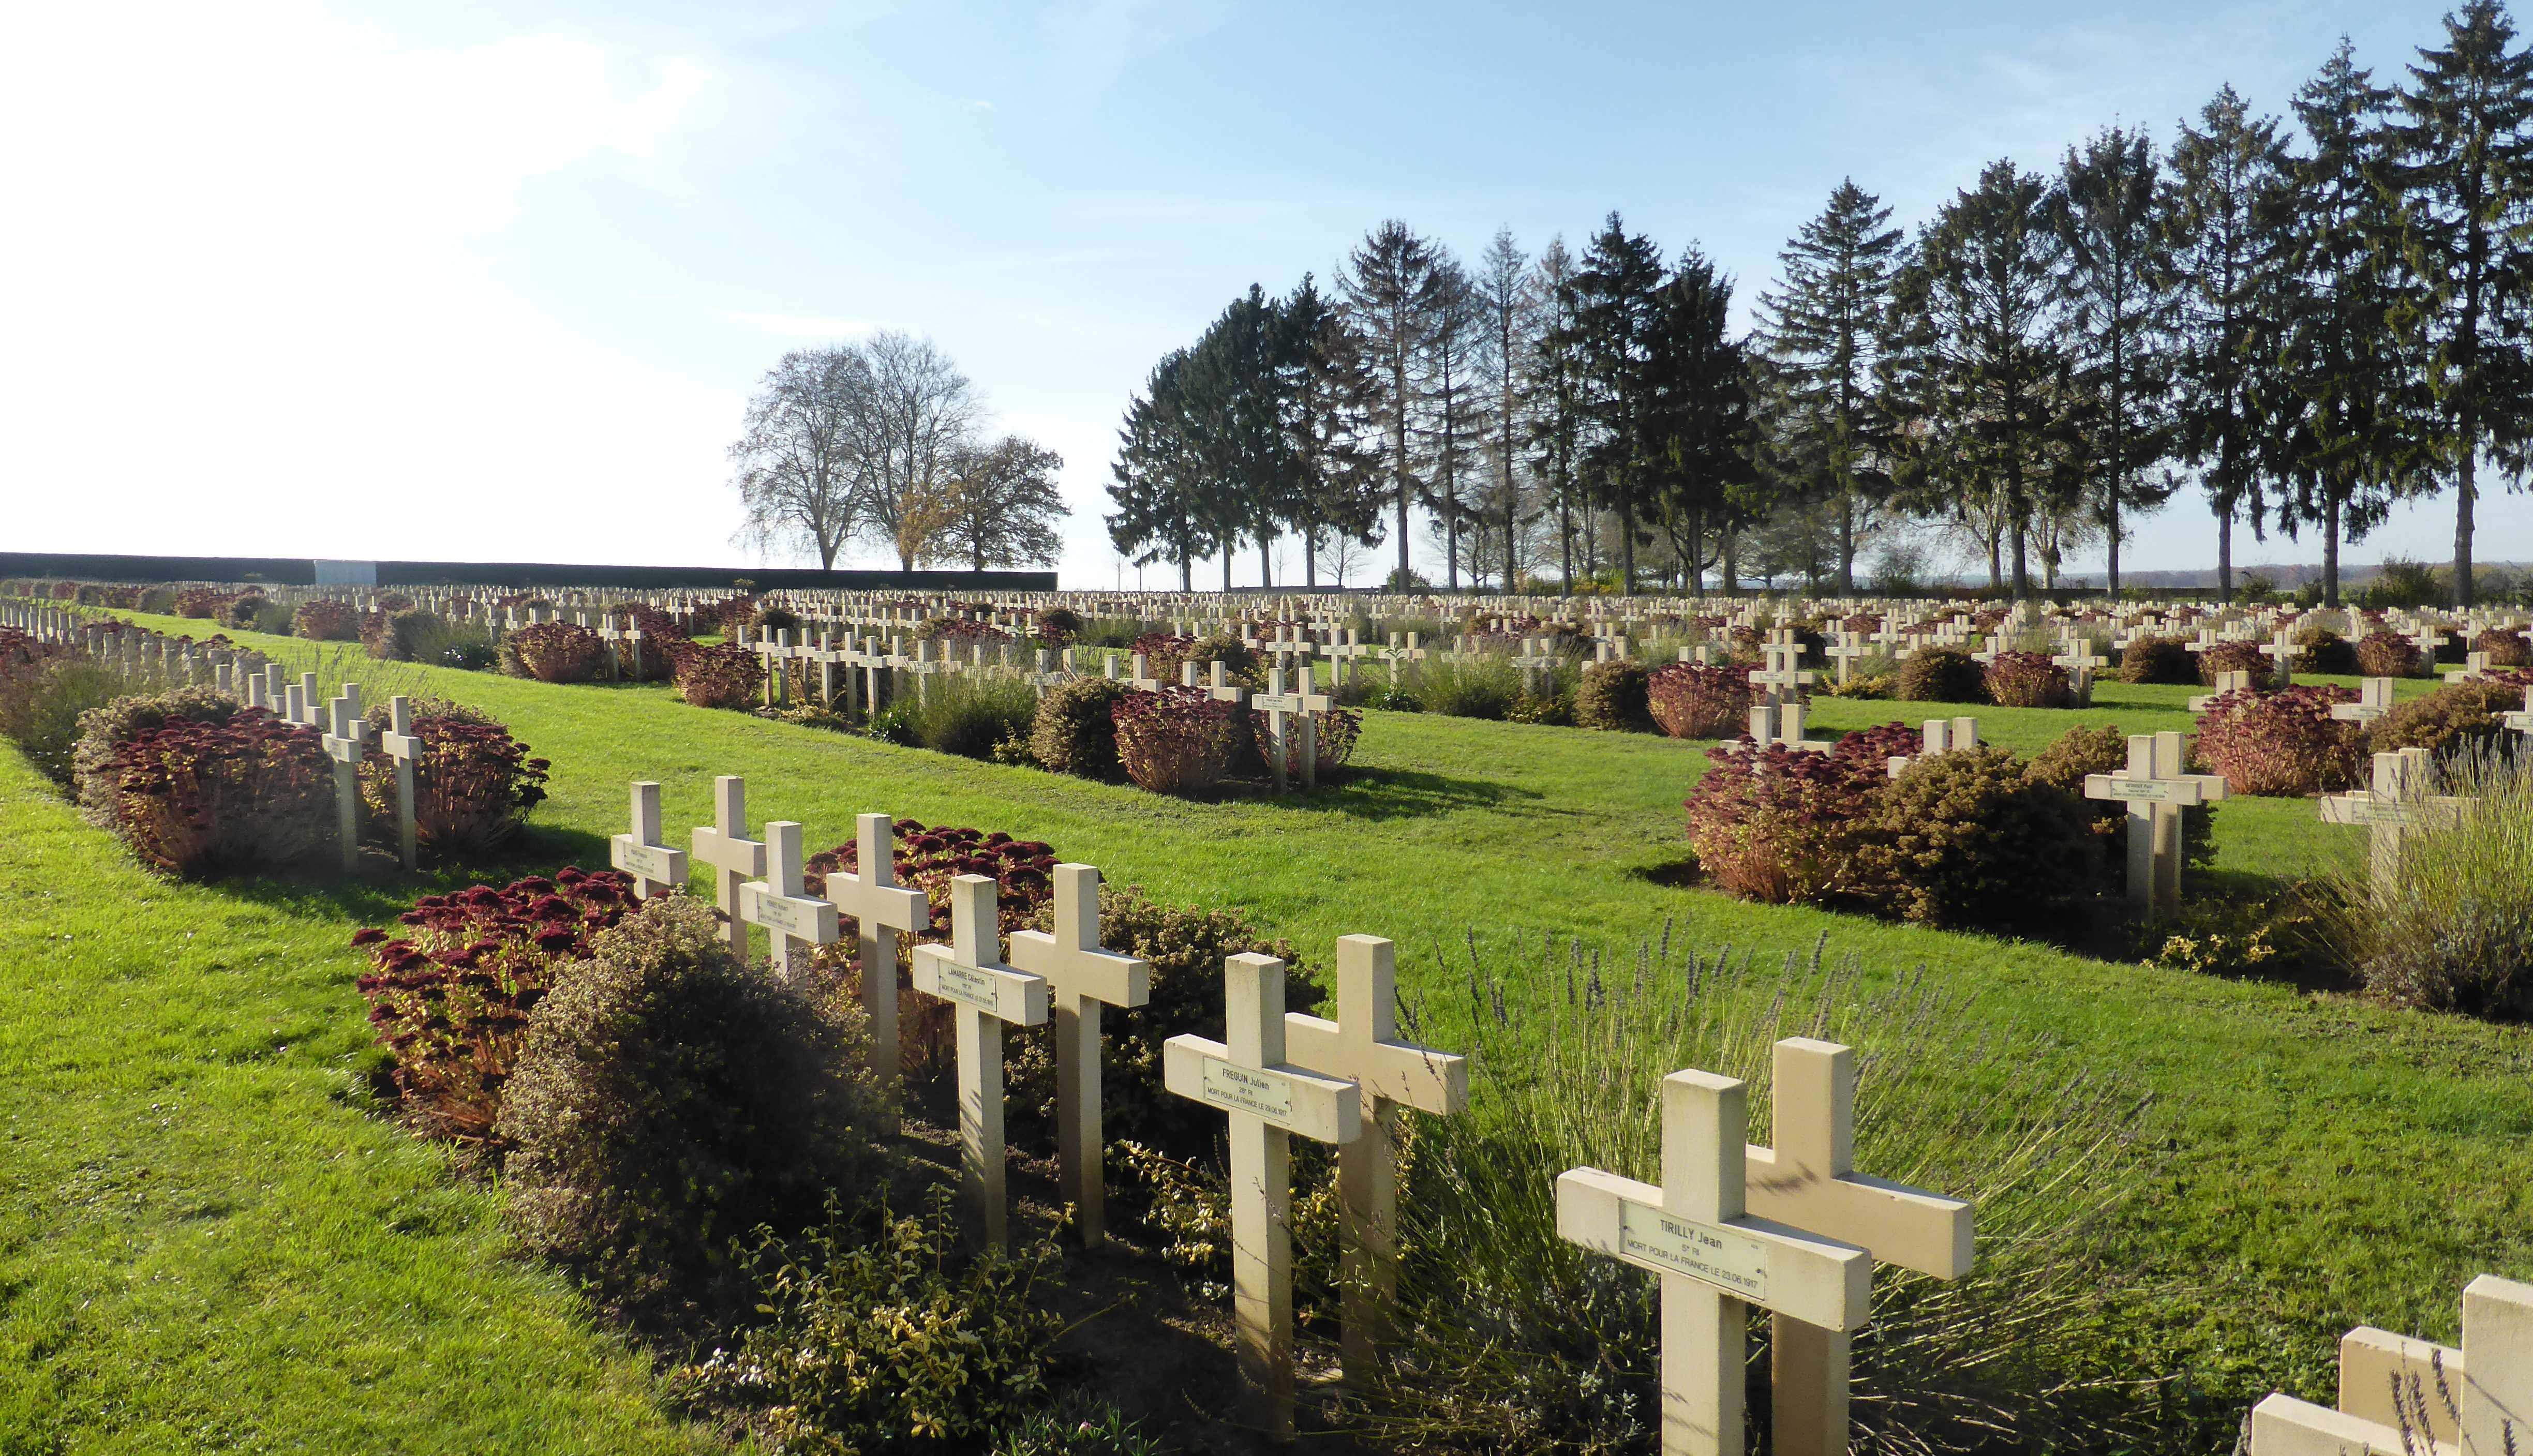 The French military graveyard in Cerny-en-Laonnois